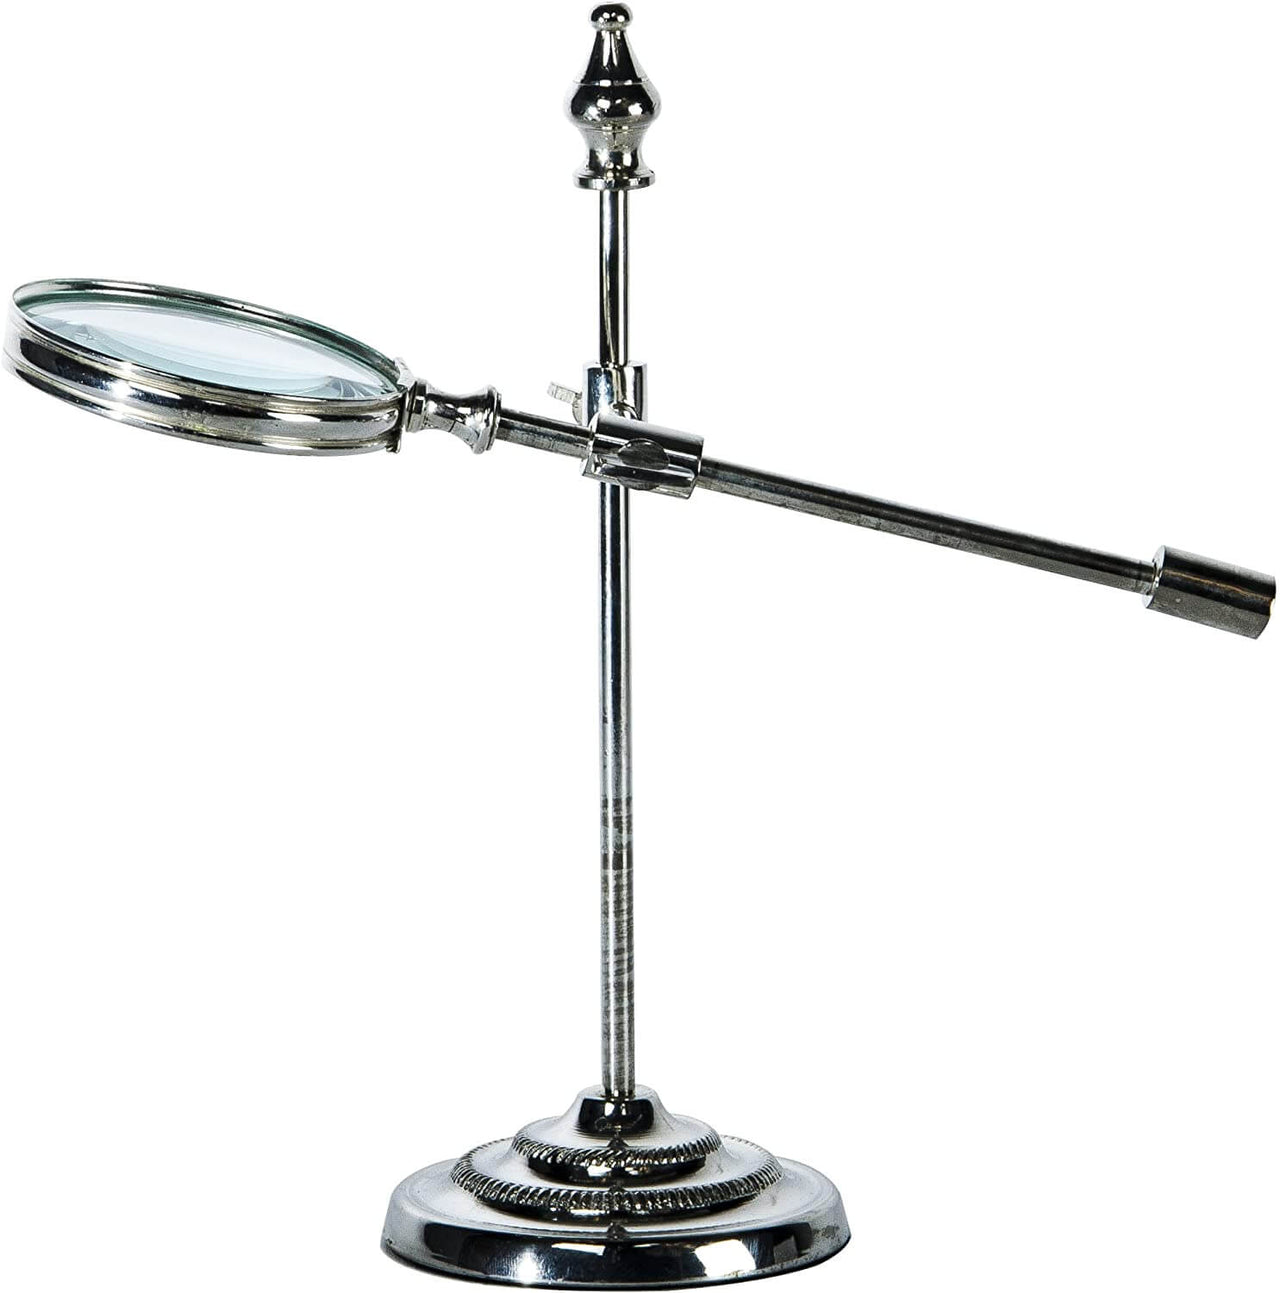 Vintage Watchmaker's Magnifying Glass with Adjustable Stand